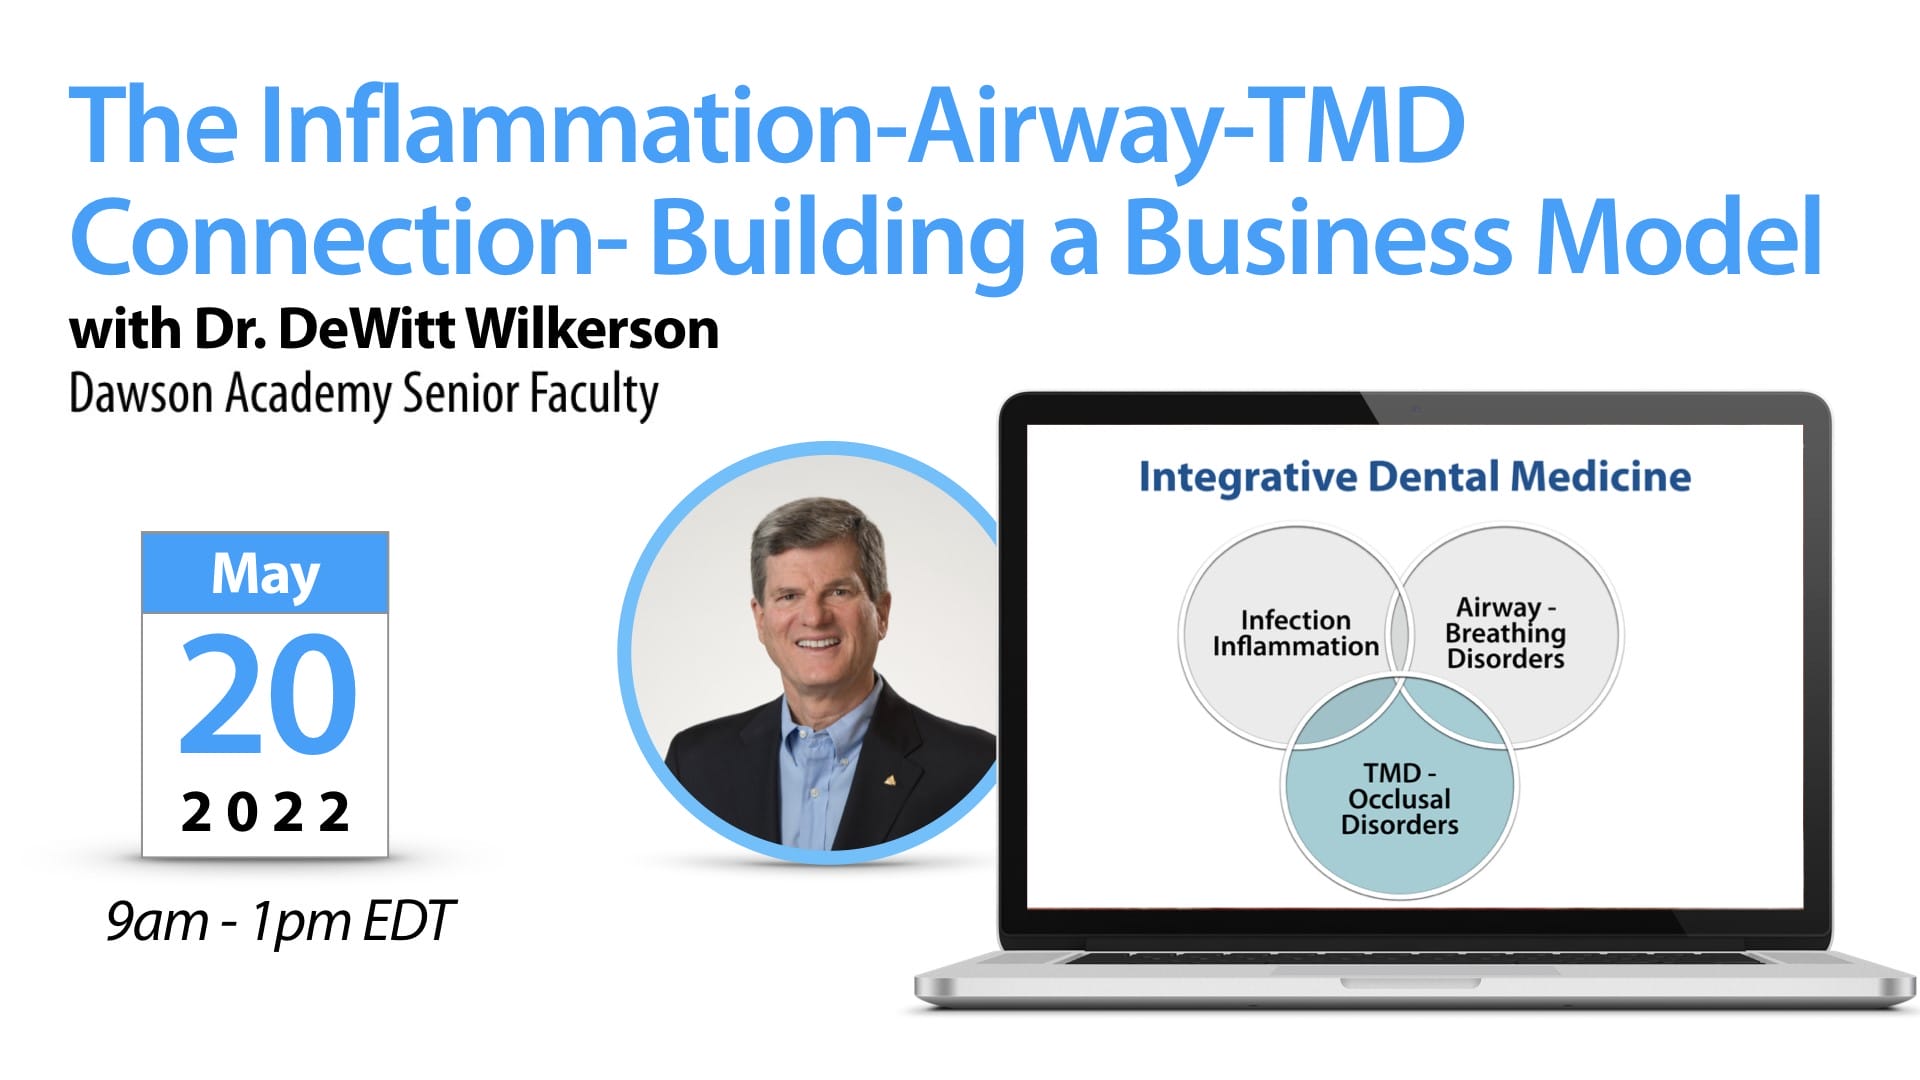 Live Stream | The Inflammation-Airway-TMD Connection - Building Systems,  Implementation & A Business Model - The Dawson Academy